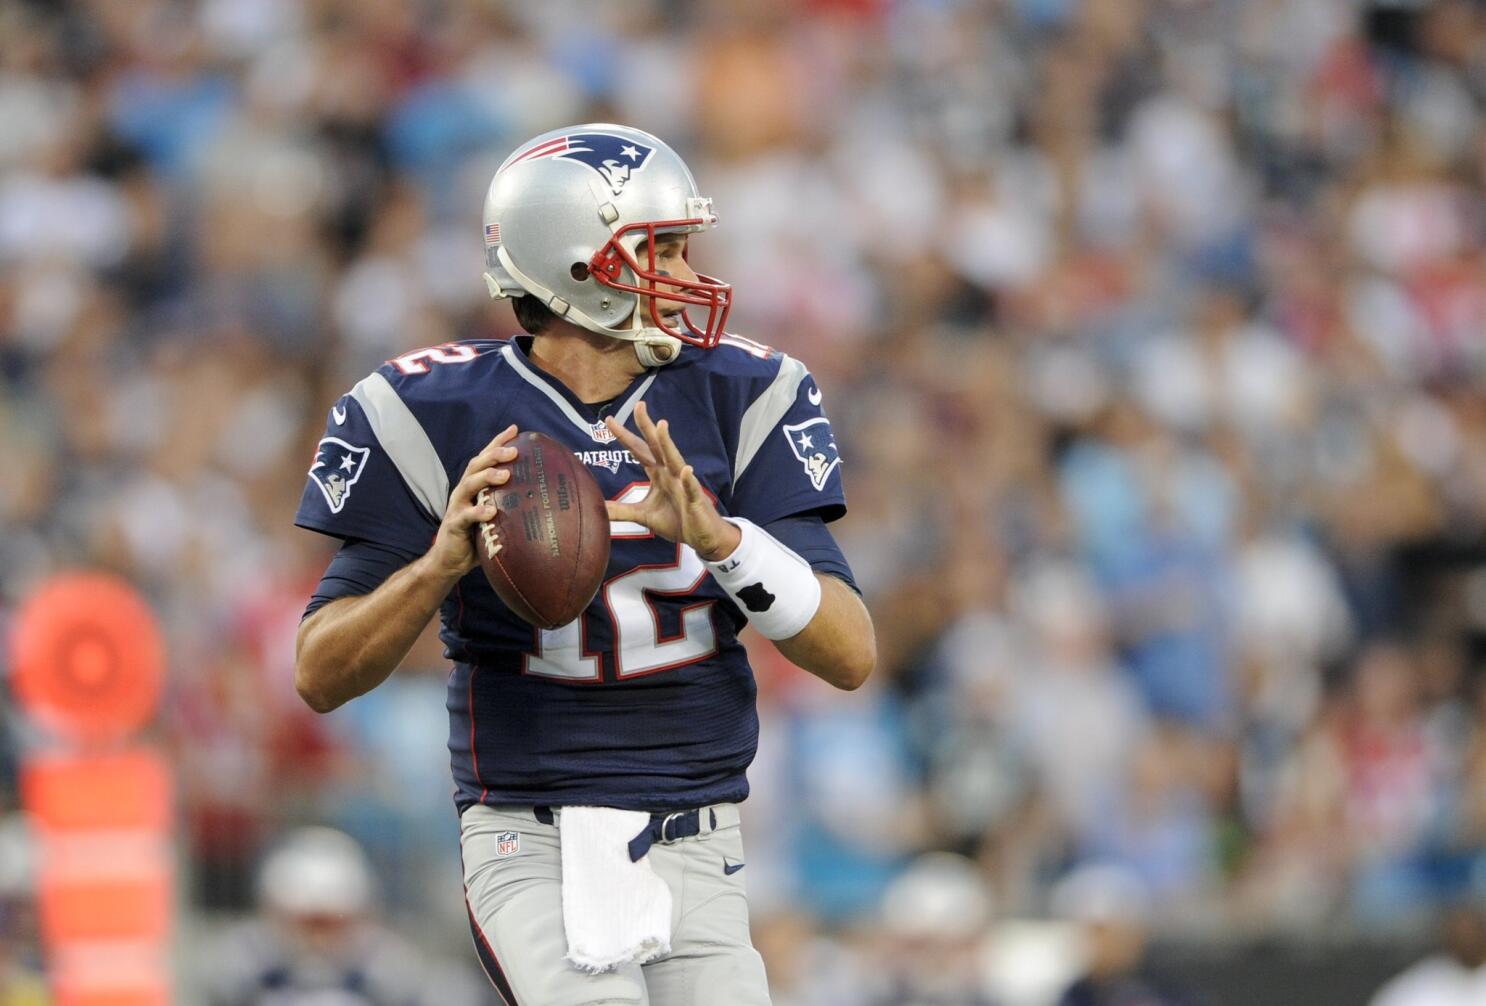 The Latest: Brady takes field, fires up fans with fist pumps